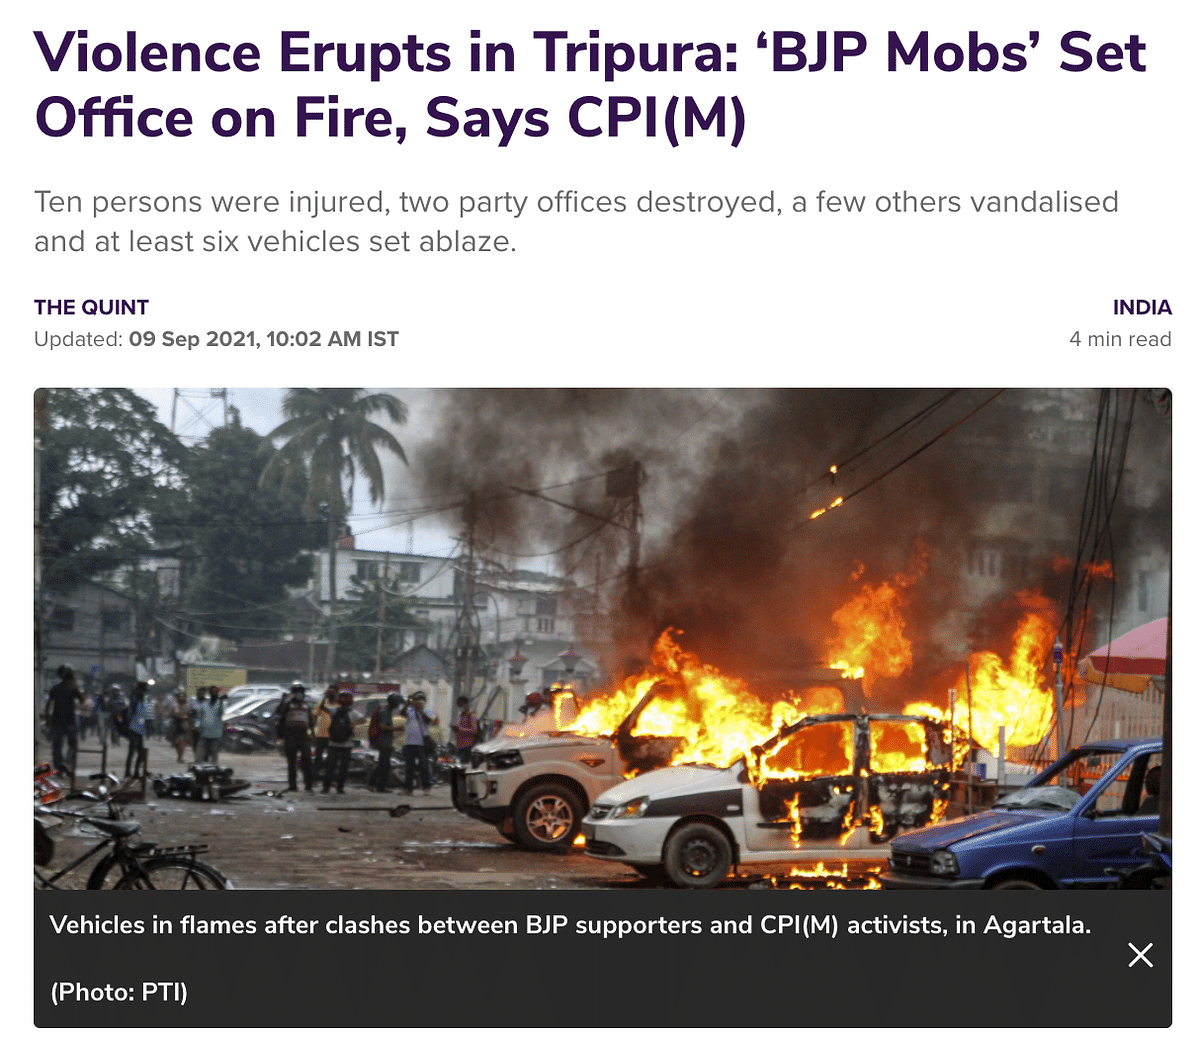 Both the images are unrelated and do not show the recent violence that broke out in Tripura on 26 October.